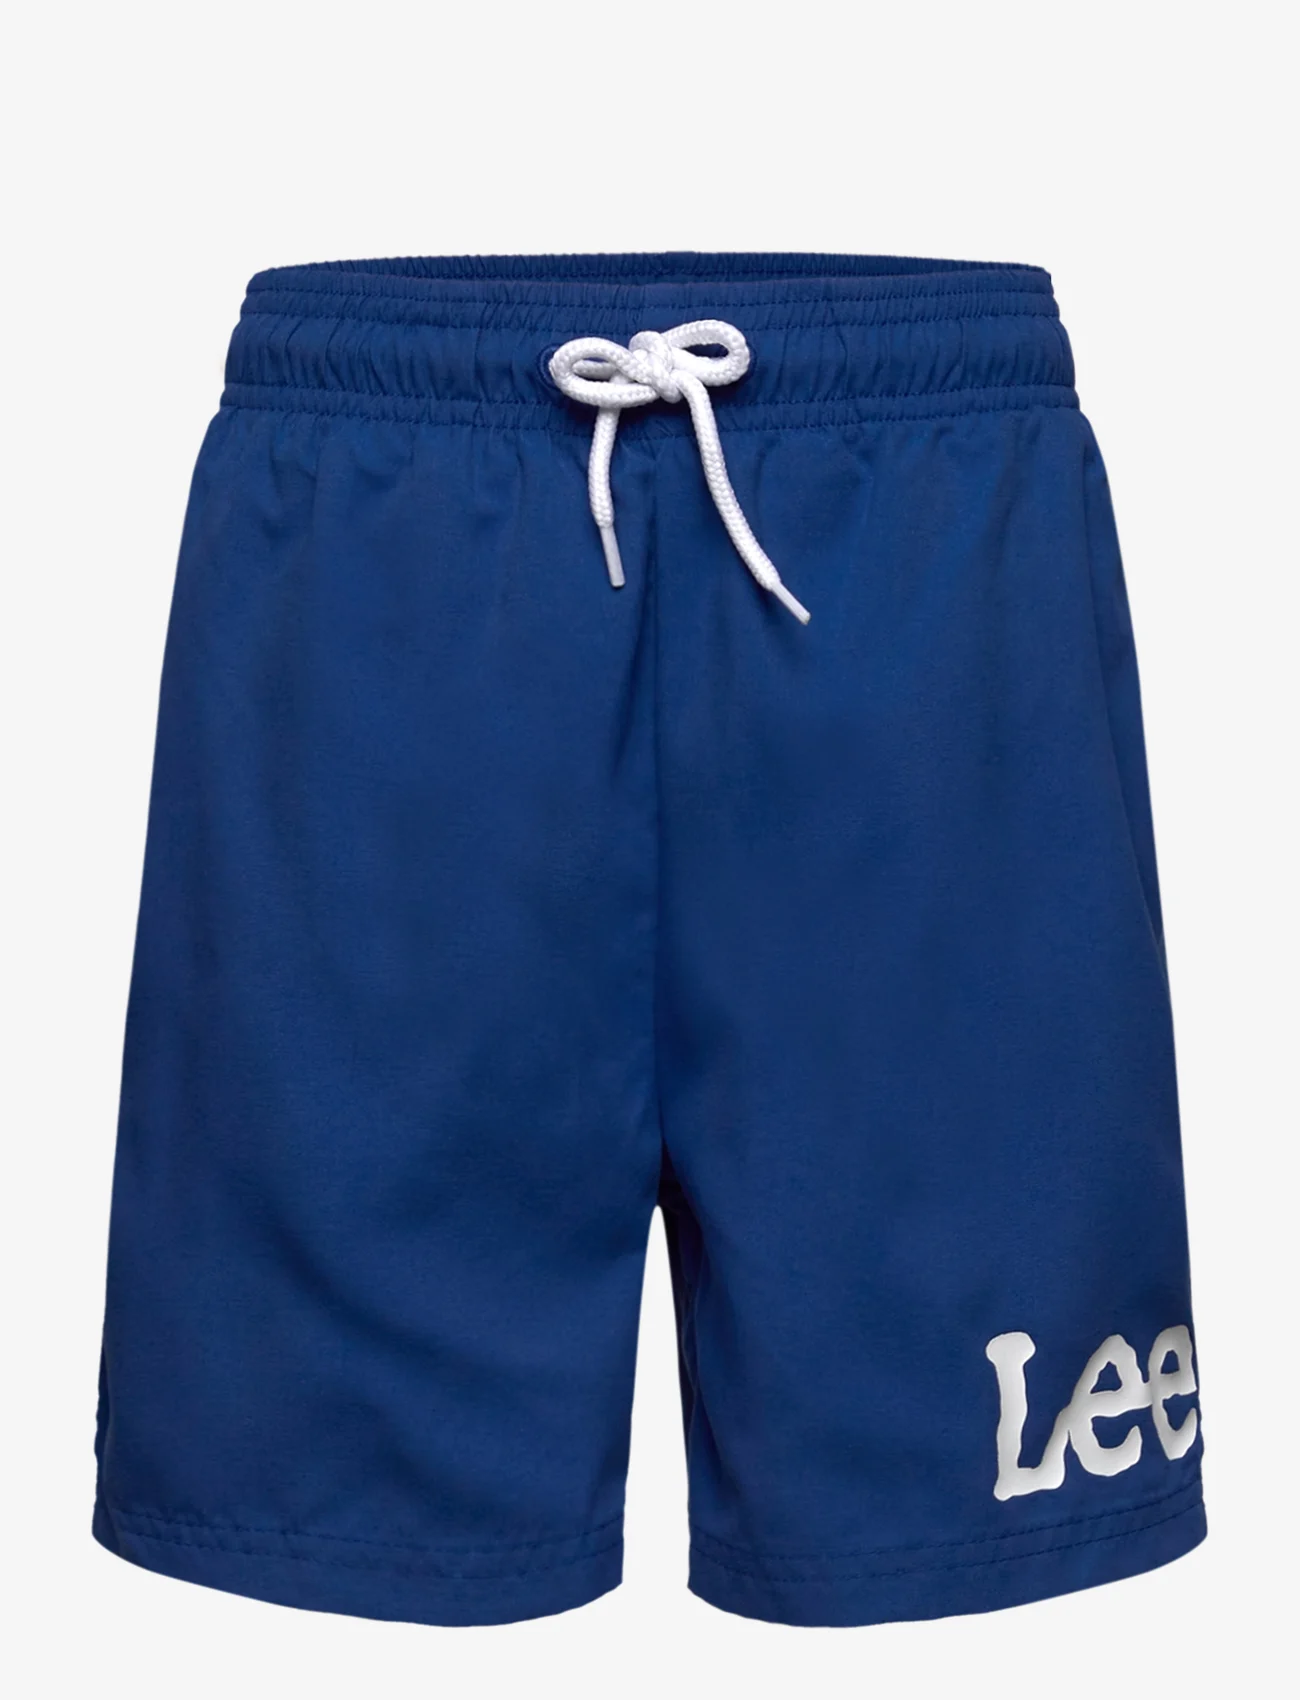 Lee Jeans - Wobbly Graphic Swimshort - sommerkupp - galaxy blue - 0